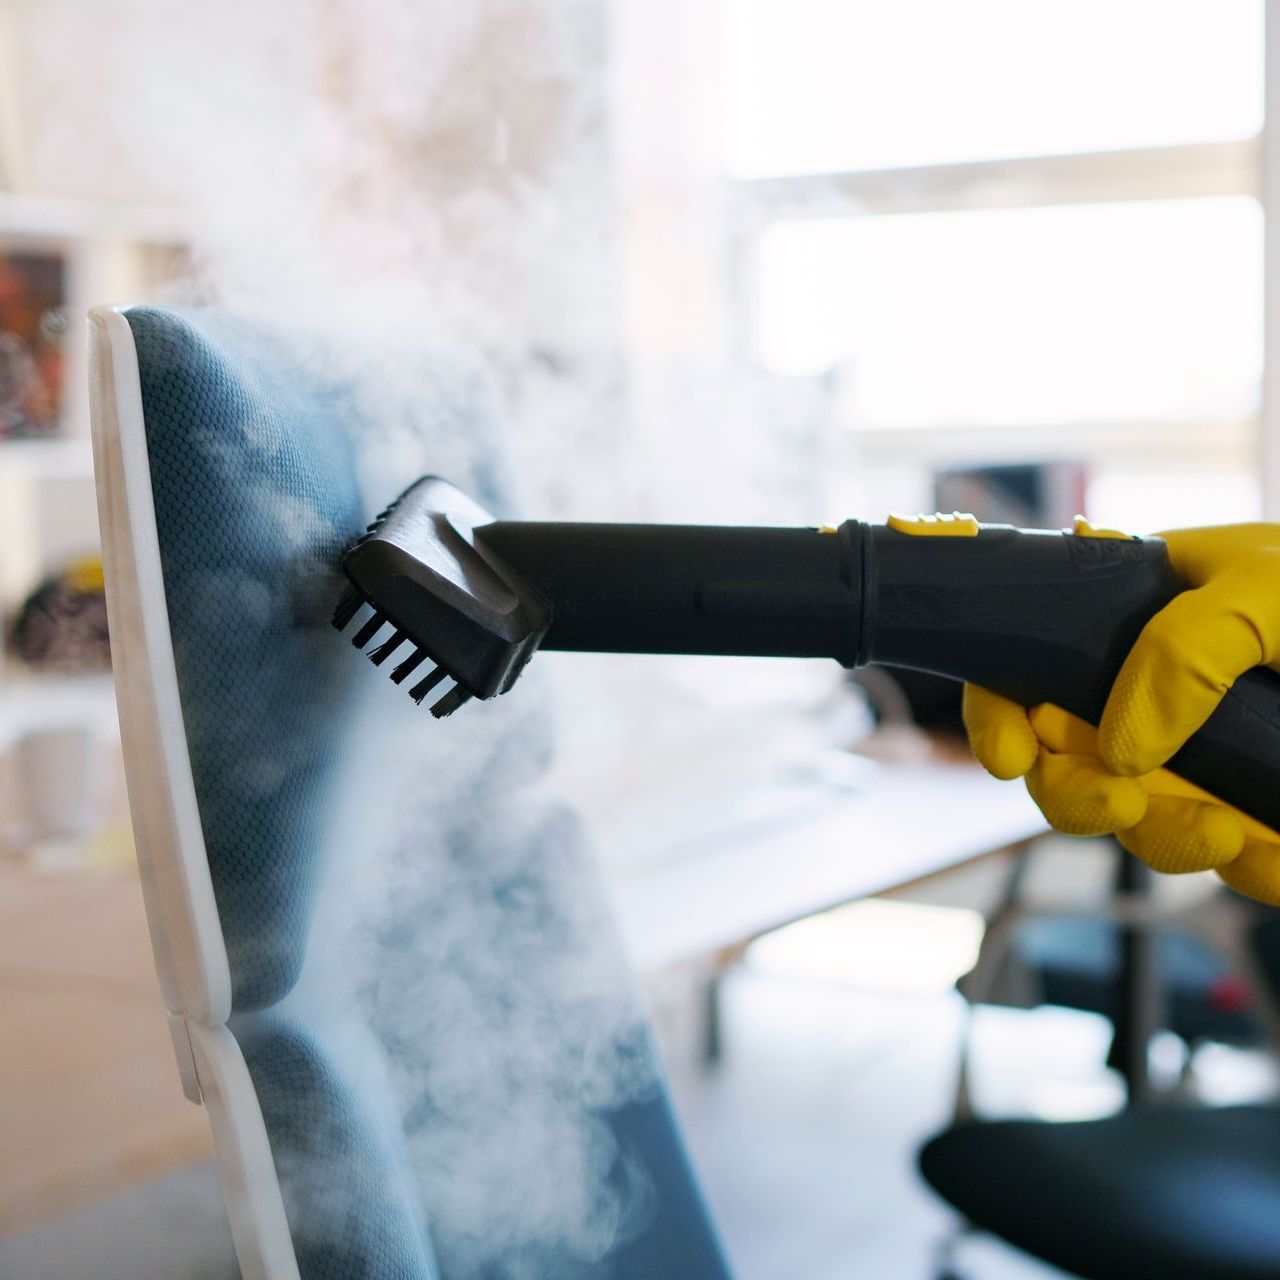 A person wearing yellow gloves is using a steam cleaner to clean a chair